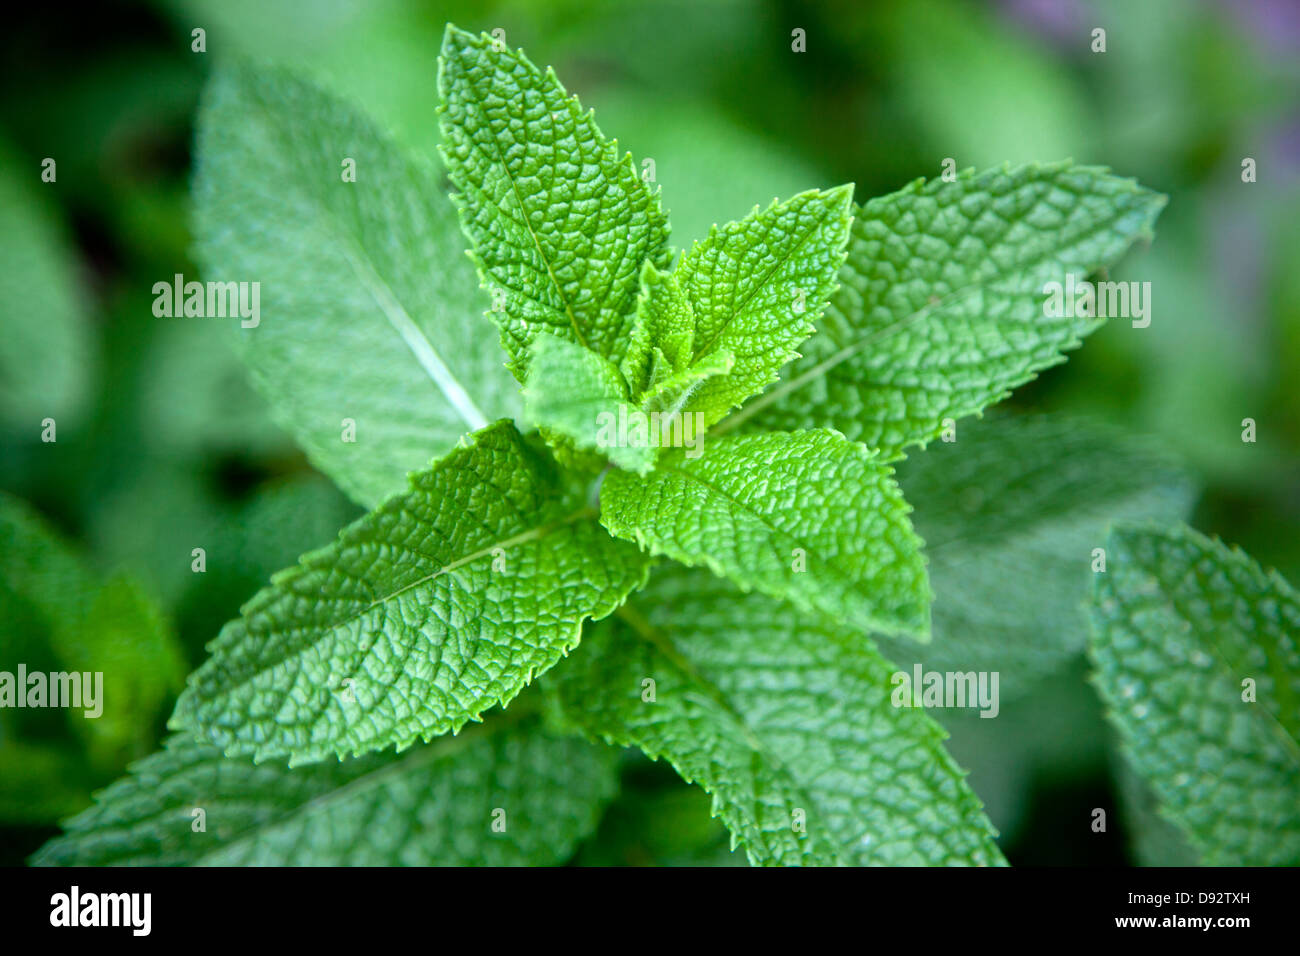 Leaves on a mint plant (Lamiaceae), close-up Stock Photo